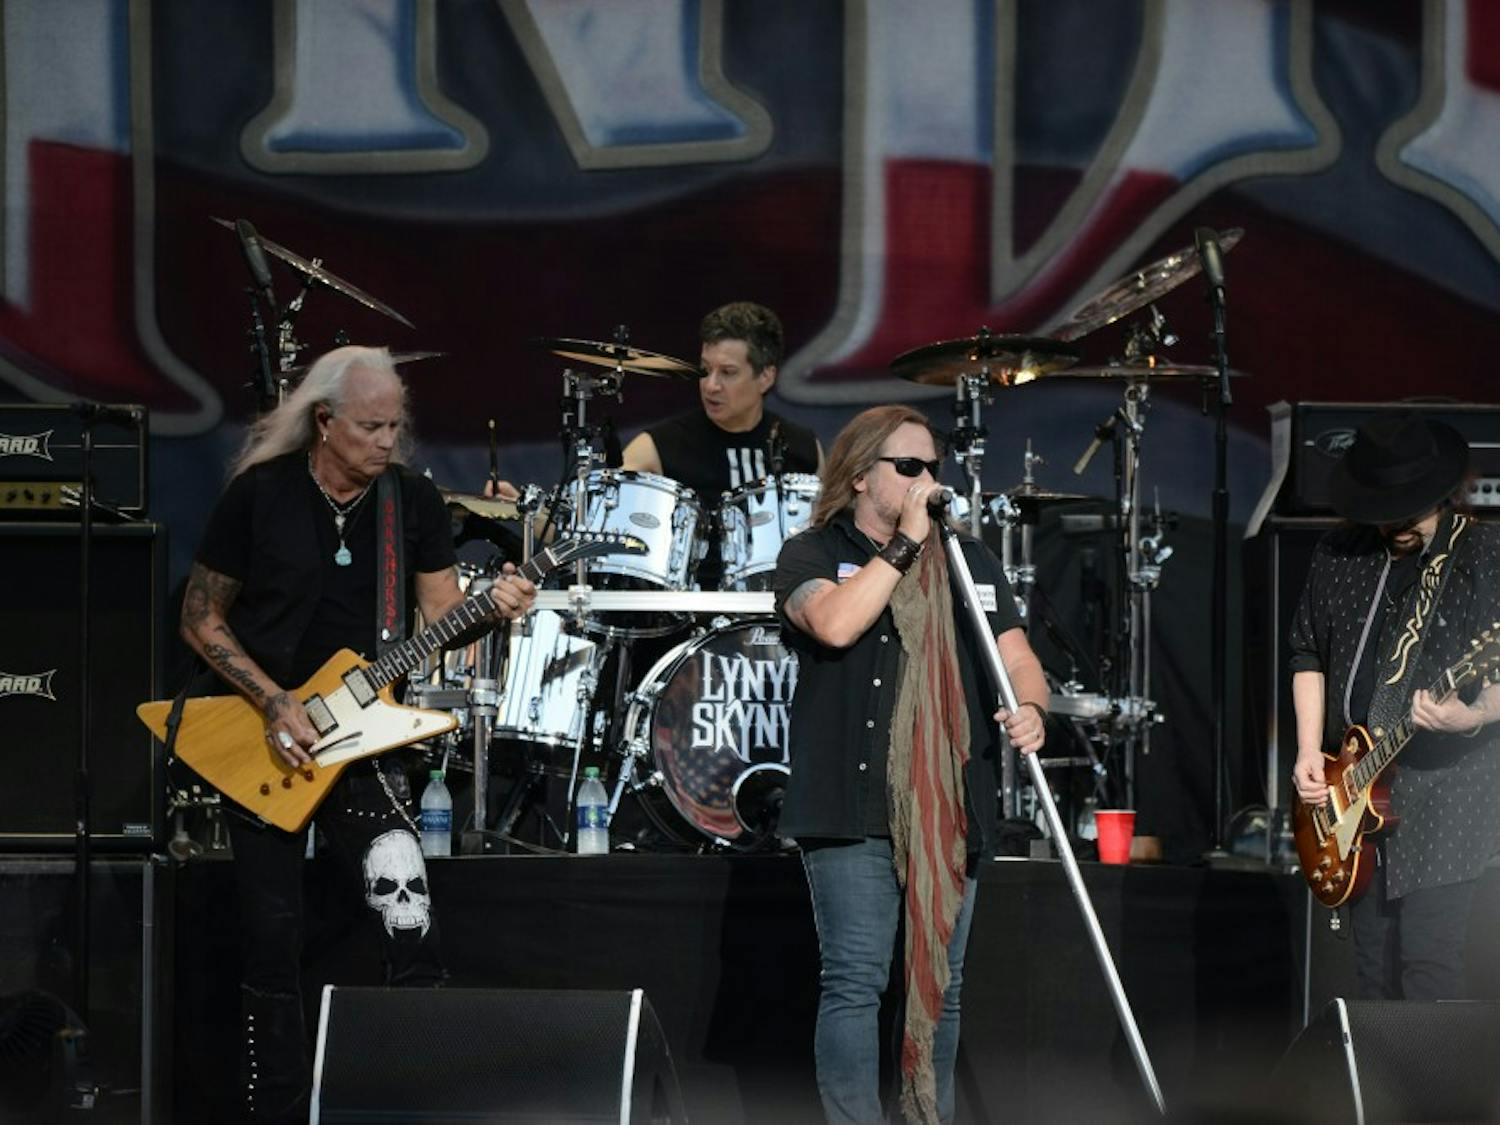 Lynyrd Skynyrd performs at Music and Miracles Superfest on Saturday, April 22, 2017 at Jordan-Hare Stadium in Auburn, Ala.